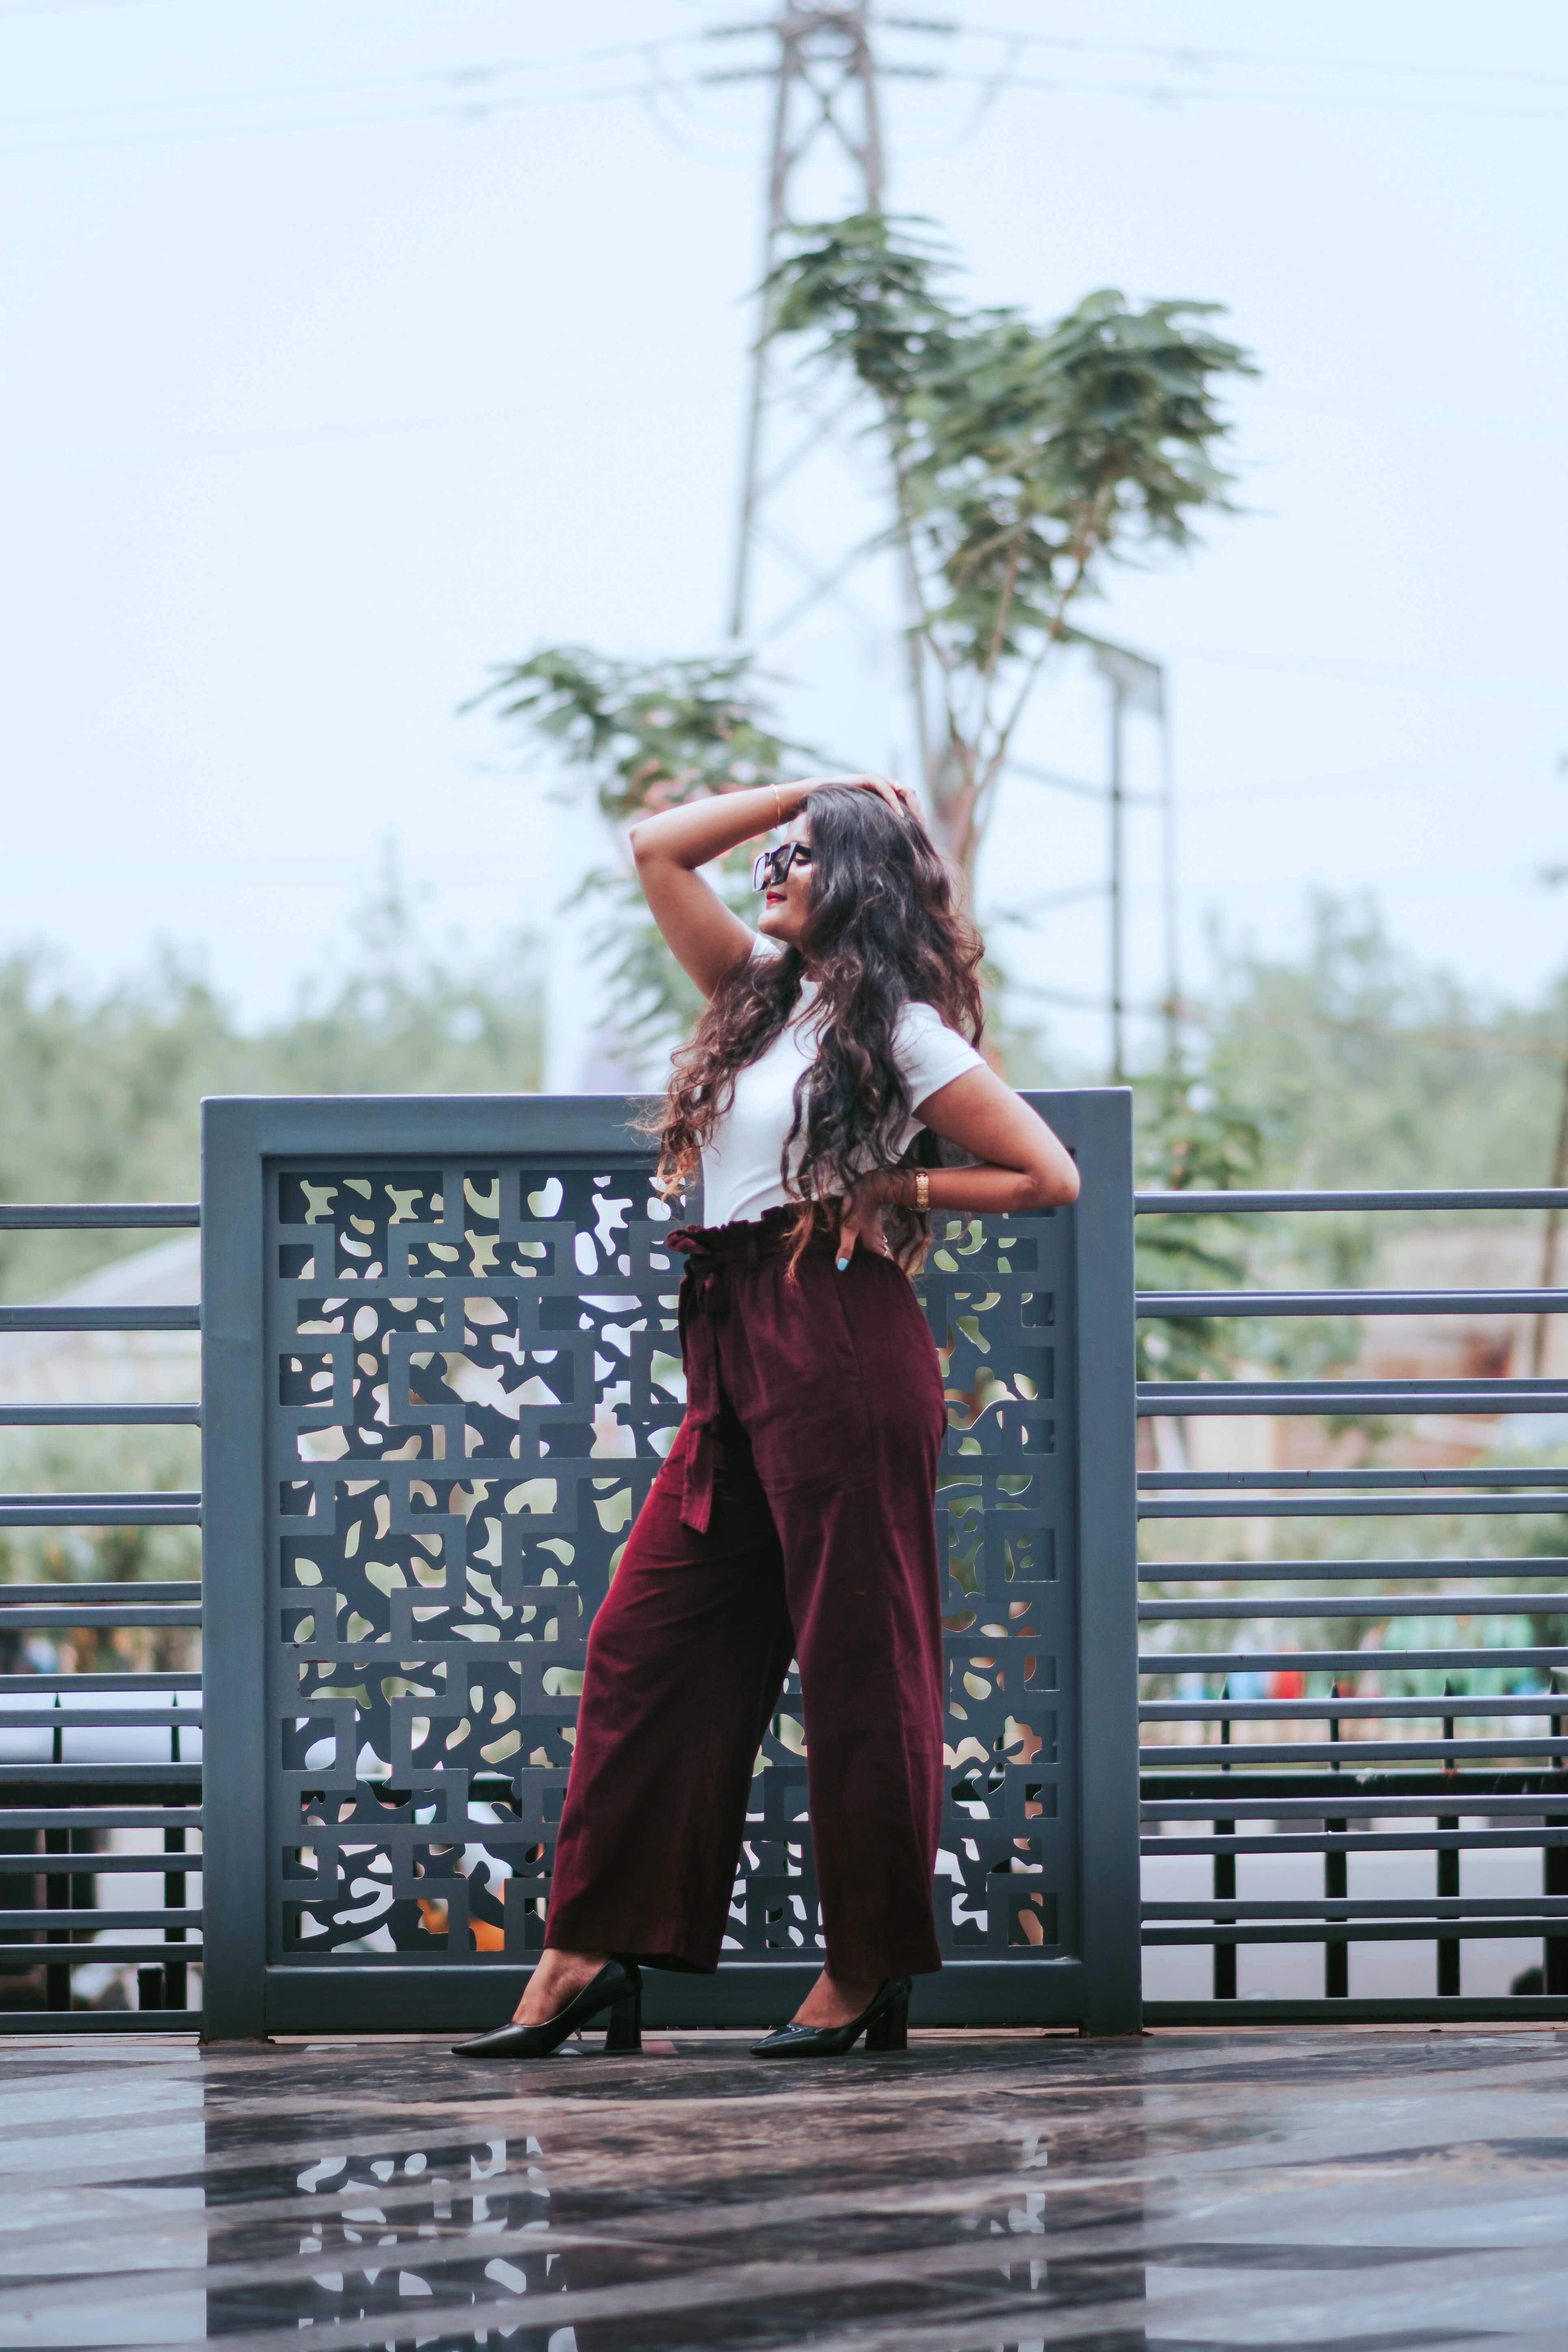 Get Your Hands On These Super Trendy Pants From This Fun Brand